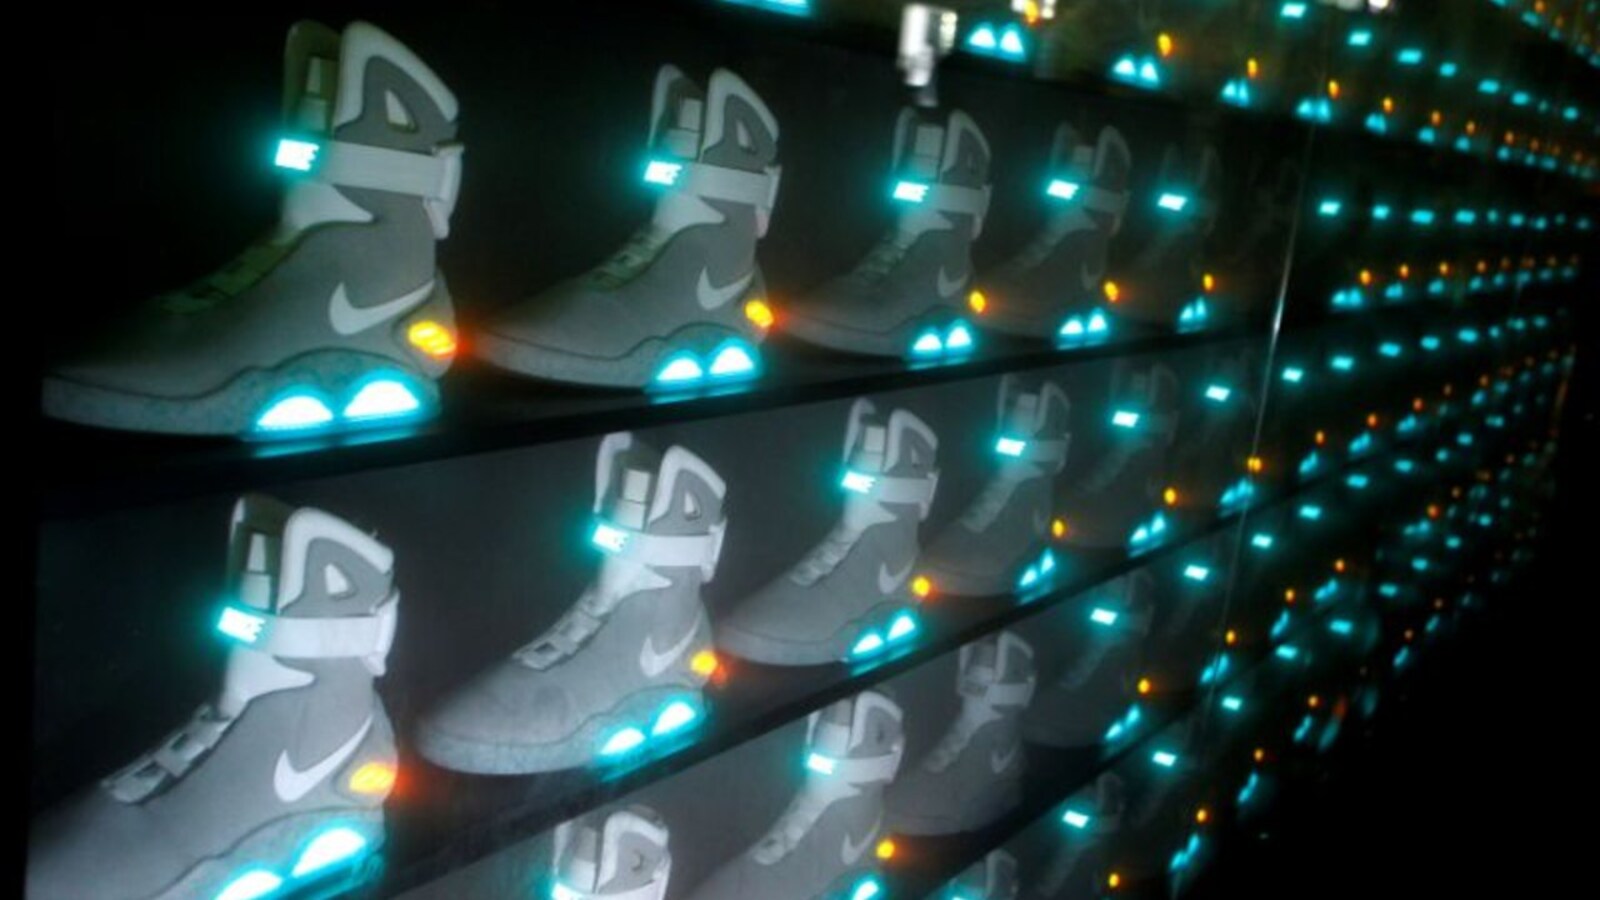 Nike's Back the Future II sneakers expected to fetch Rs 48 lakh bid at Sotheby's